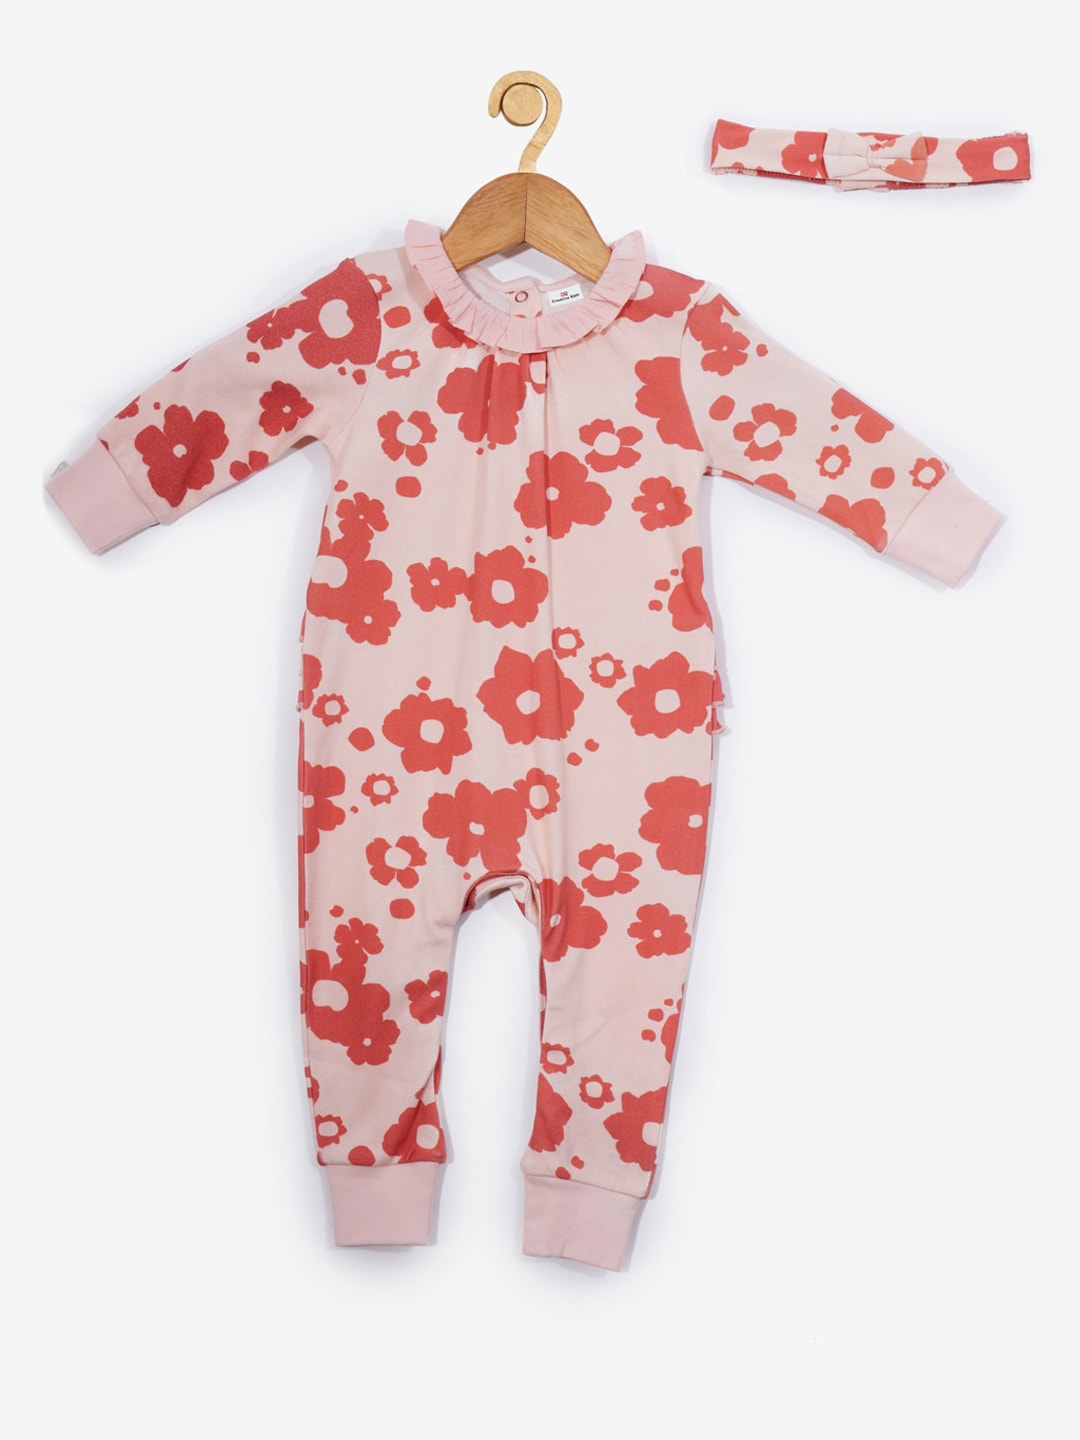 Creative Kids Infant Organic Cotton Floral Rompers With Head Band